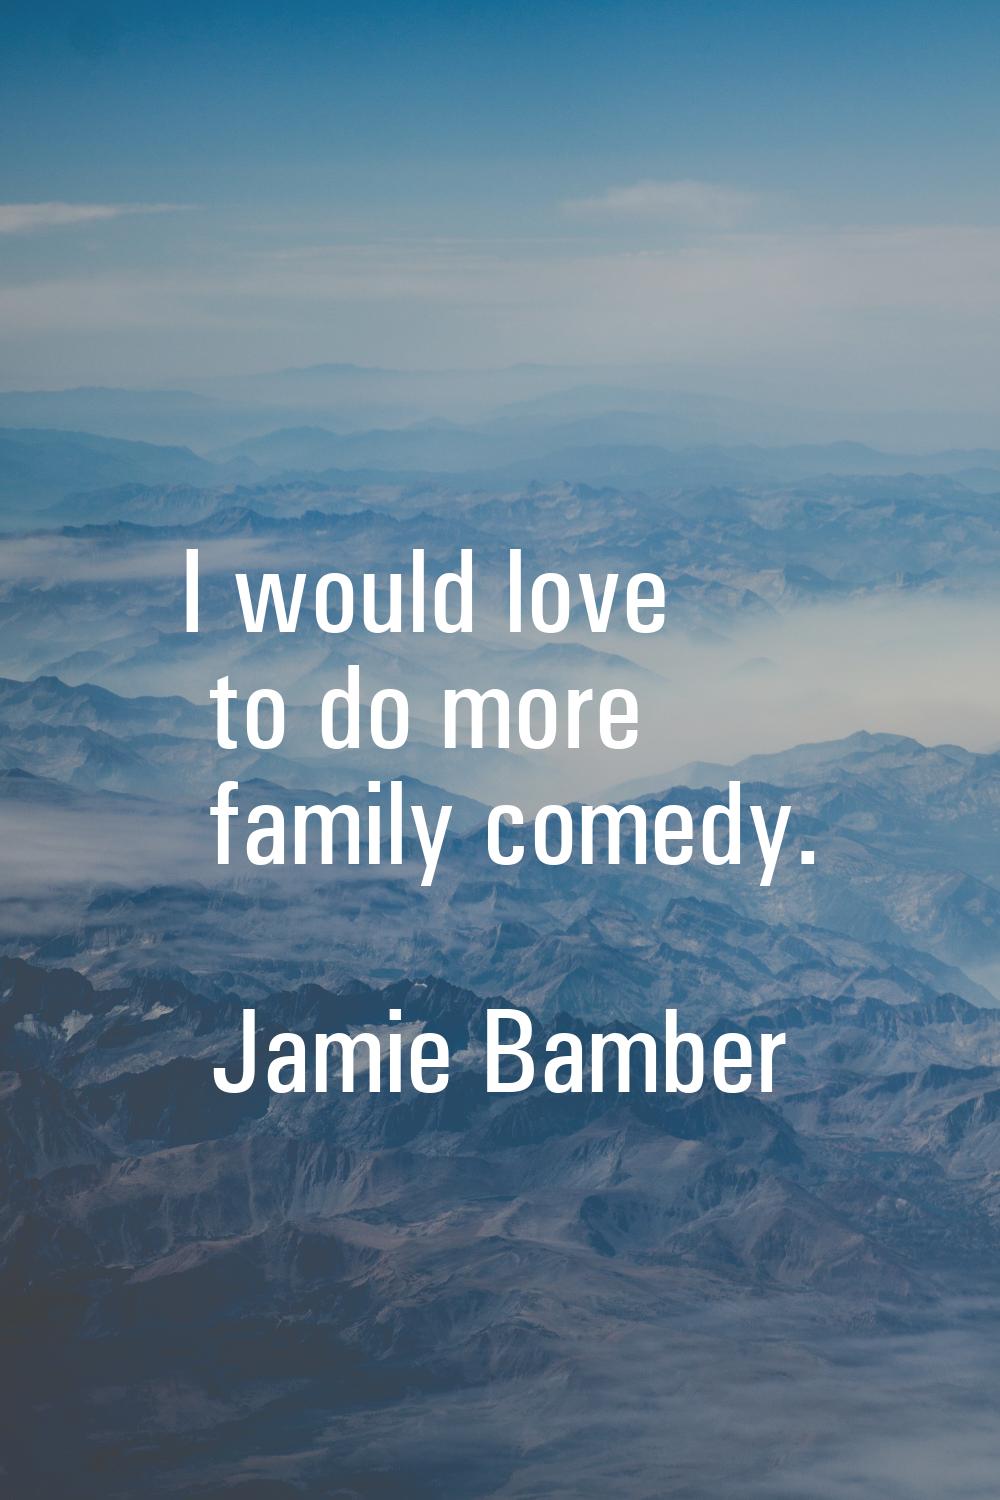 I would love to do more family comedy.